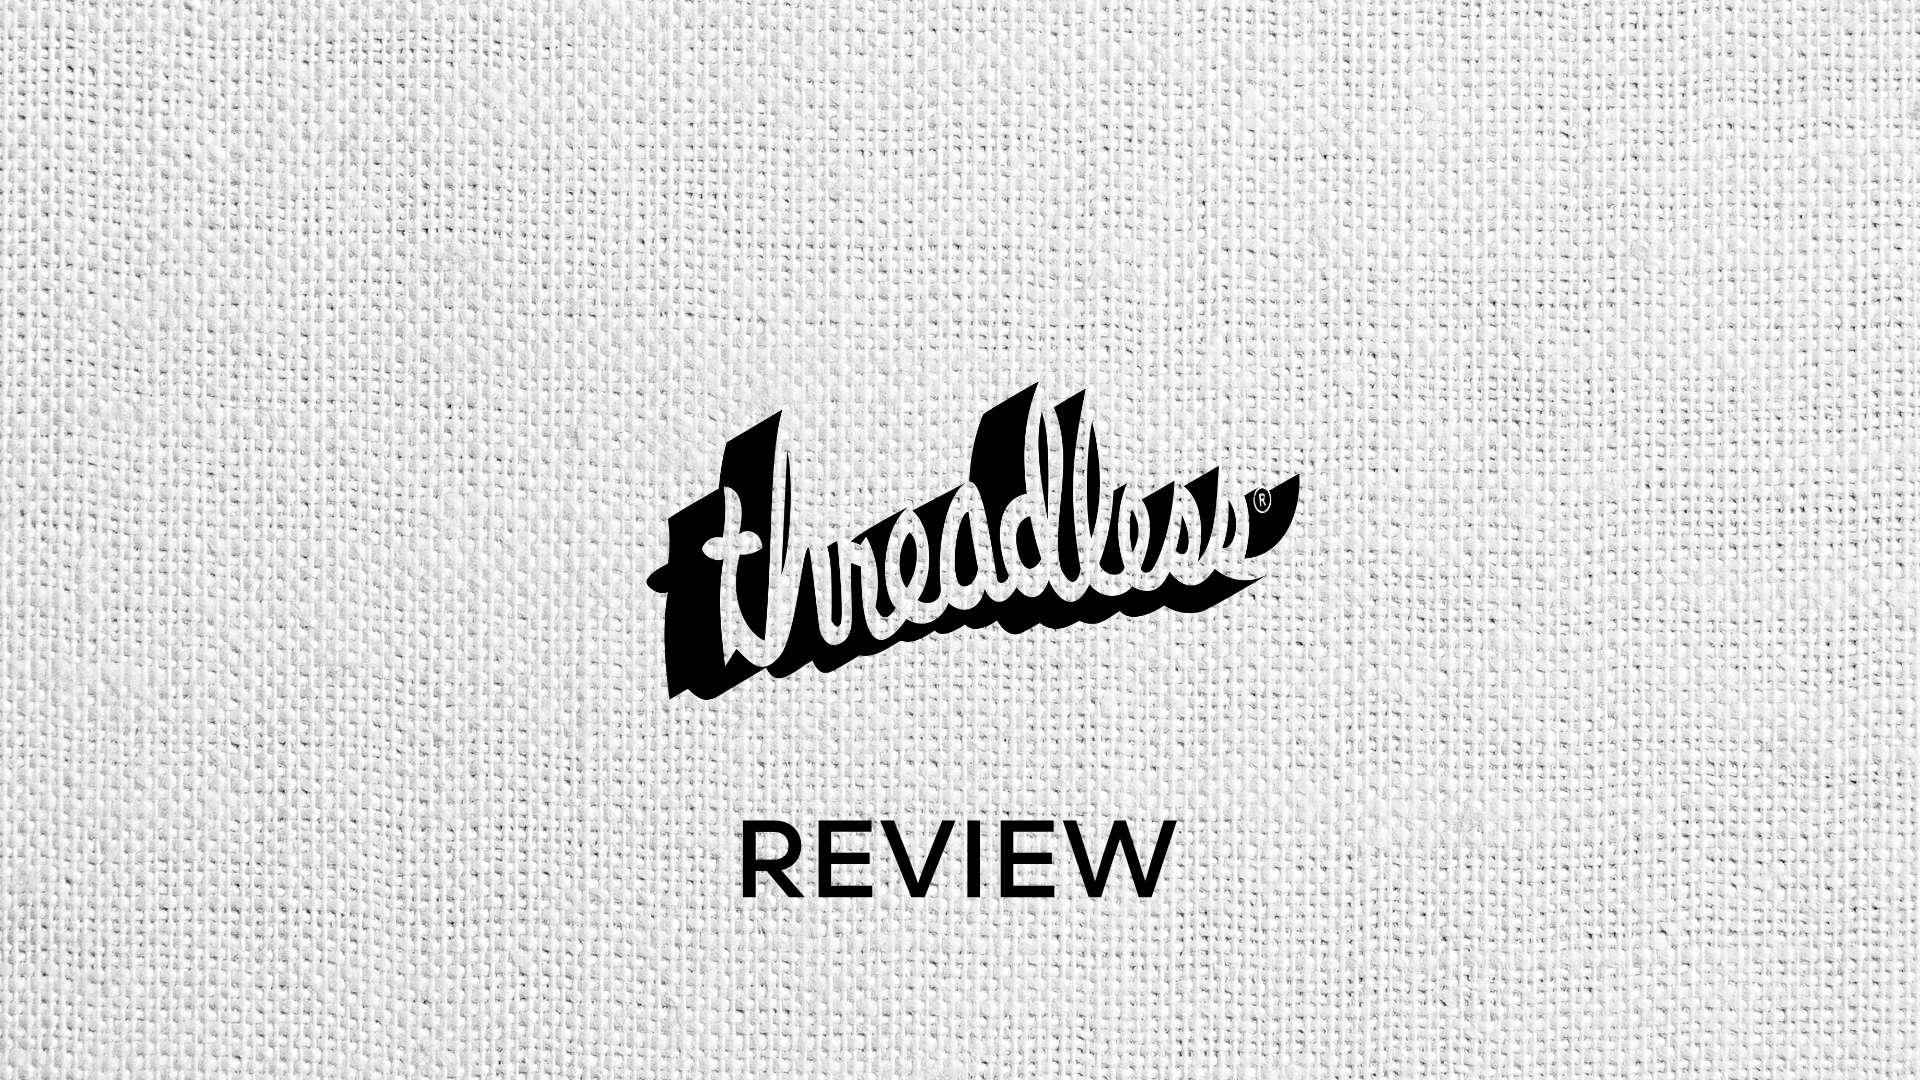 Should You List Your Designs on Threadless?